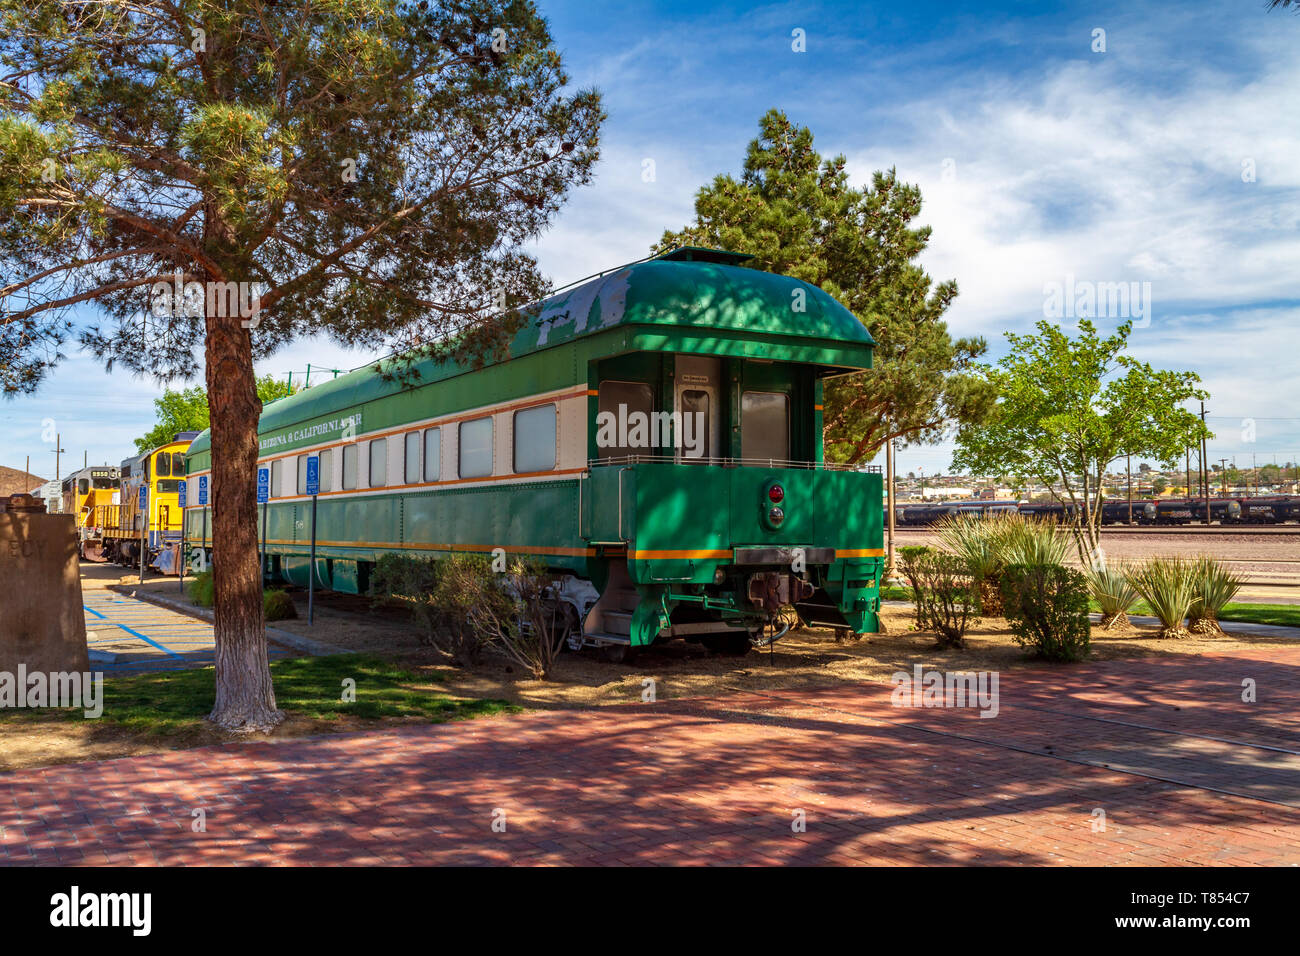 Barstow, CA / USA – April 14, 2019: Green vintage railroad passenger car at the Western America Railroad Museum located at the Barstow Harvey House at Stock Photo